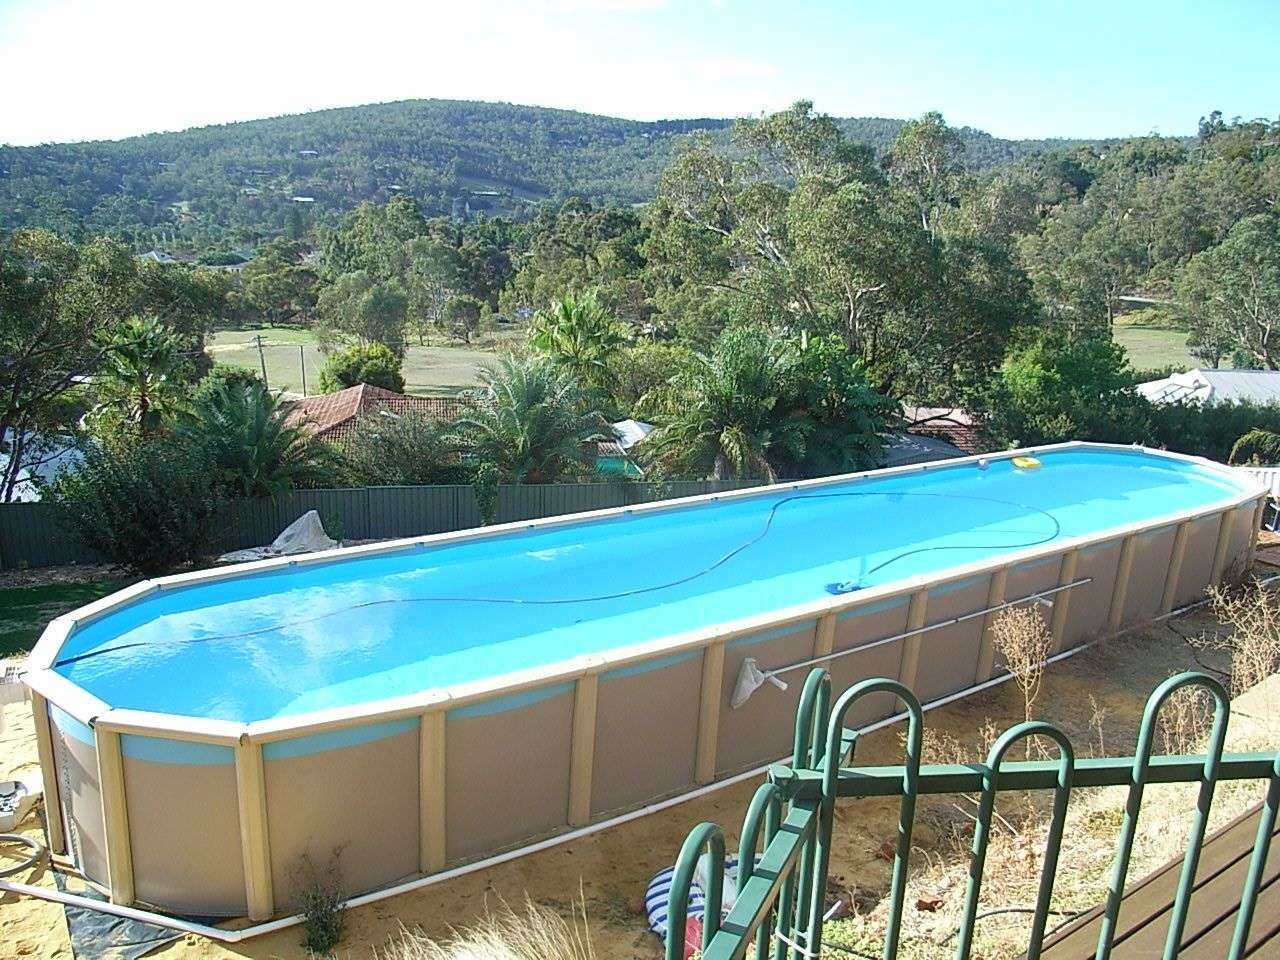 How Much Does An Above Ground Lap Pool Cost